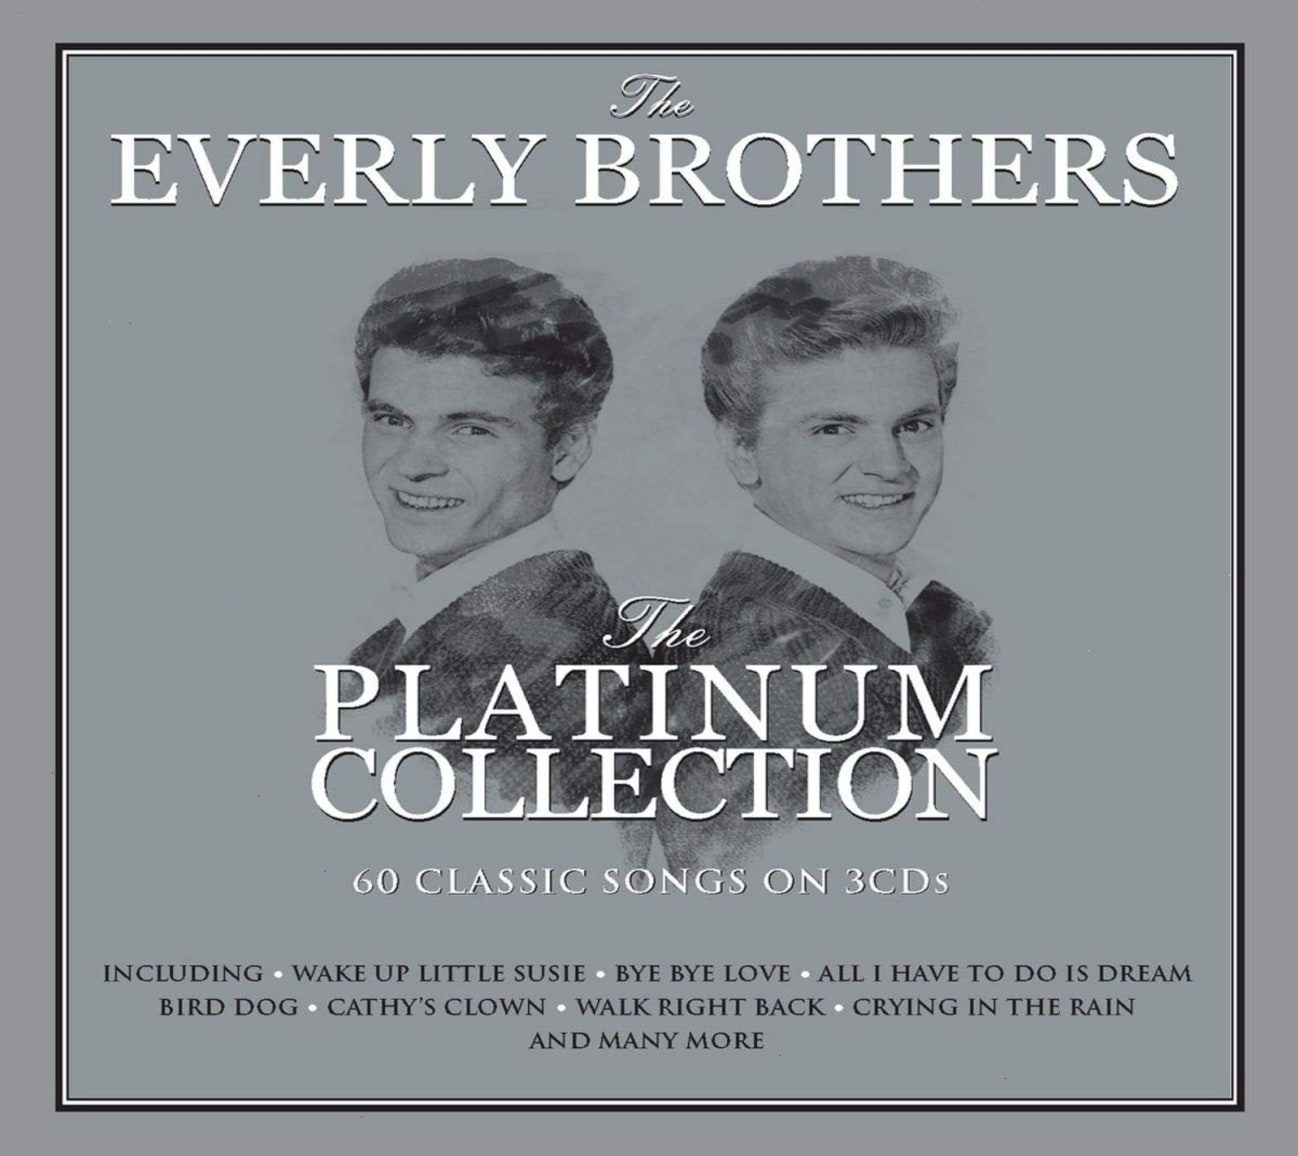 The Everly Brothers – The Platinum Collection (3CD) on MovieShack